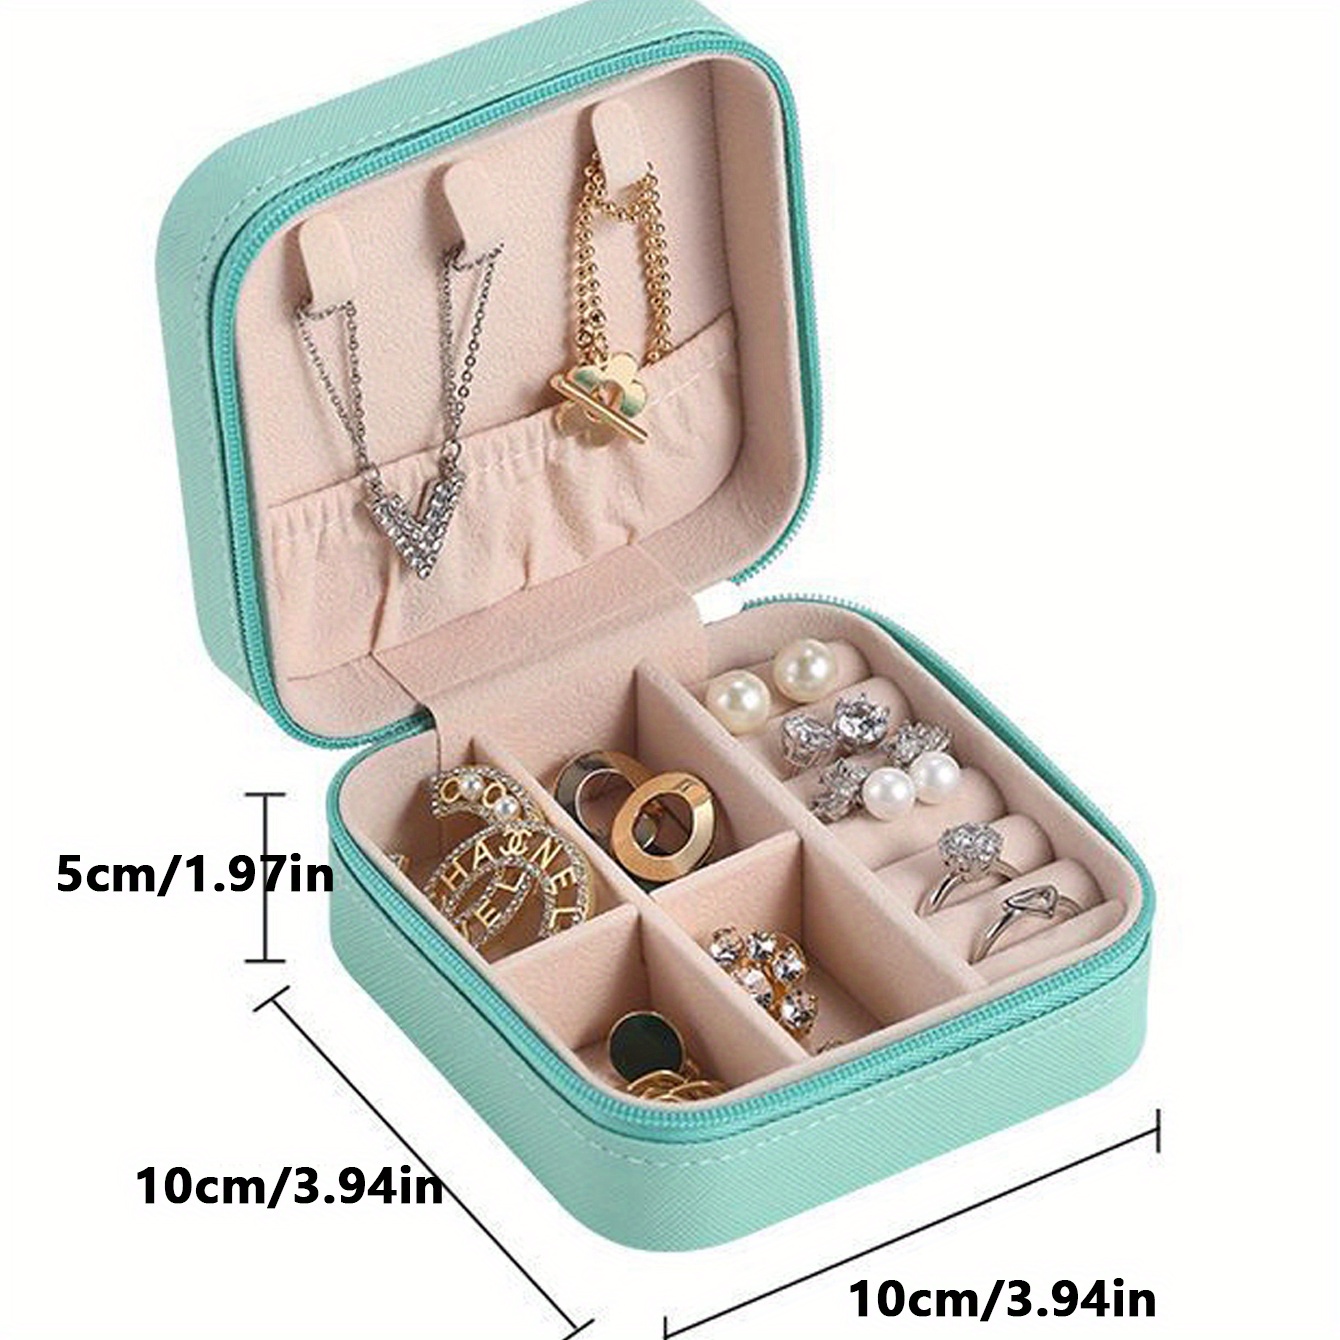 Yonzone Jewellery Box Organiser Travel Case Storage Small Boxes for Rings Earrings Necklace Bracelets, Double Layer Faux Leather Jewelry Gift Girls